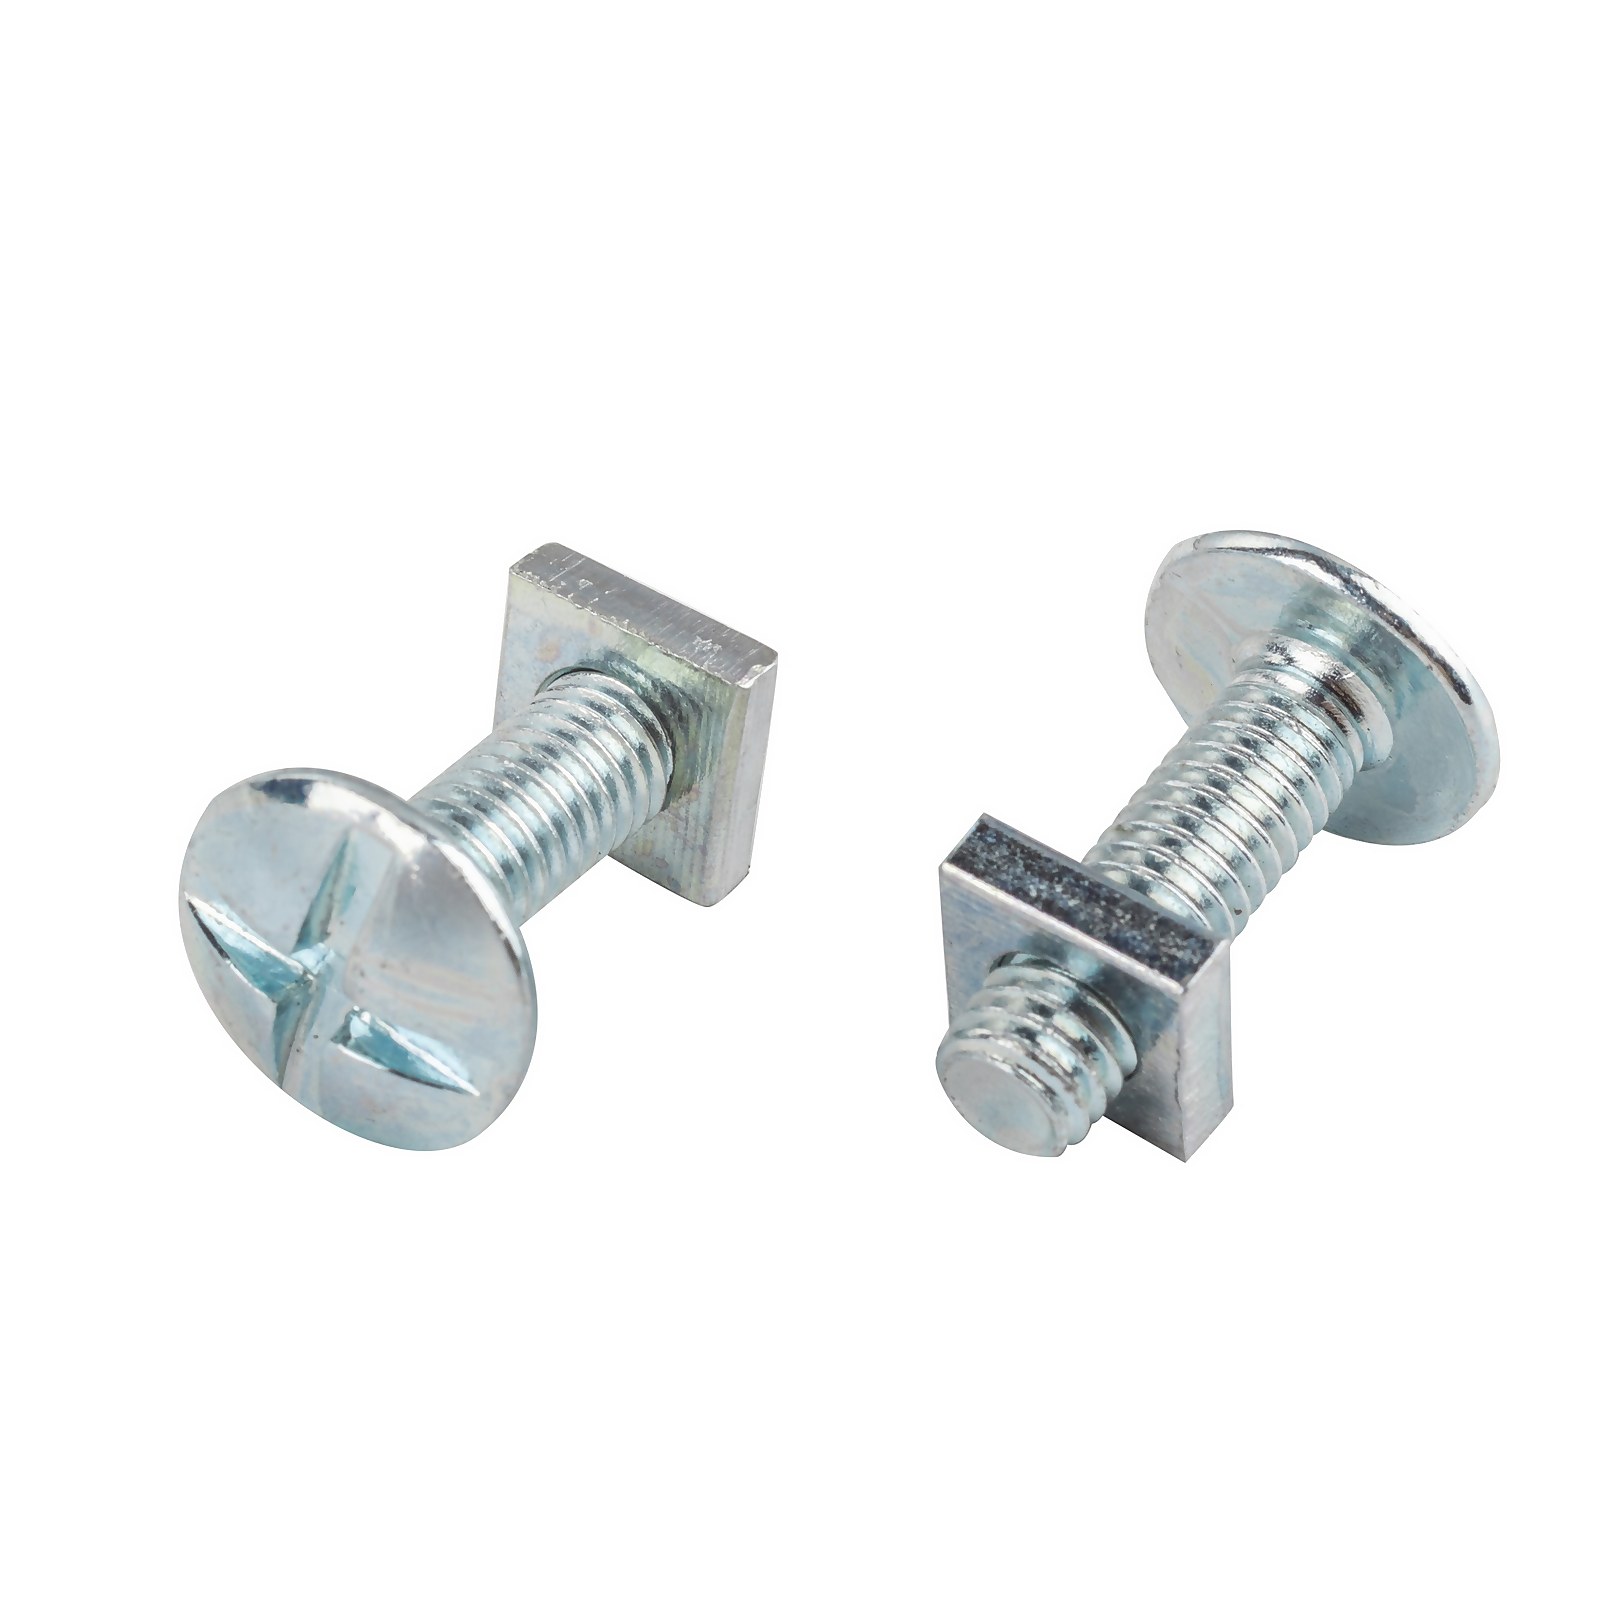 Photo of Homebase Zinc Plated Roof Bolt M6 20mm 10 Pack